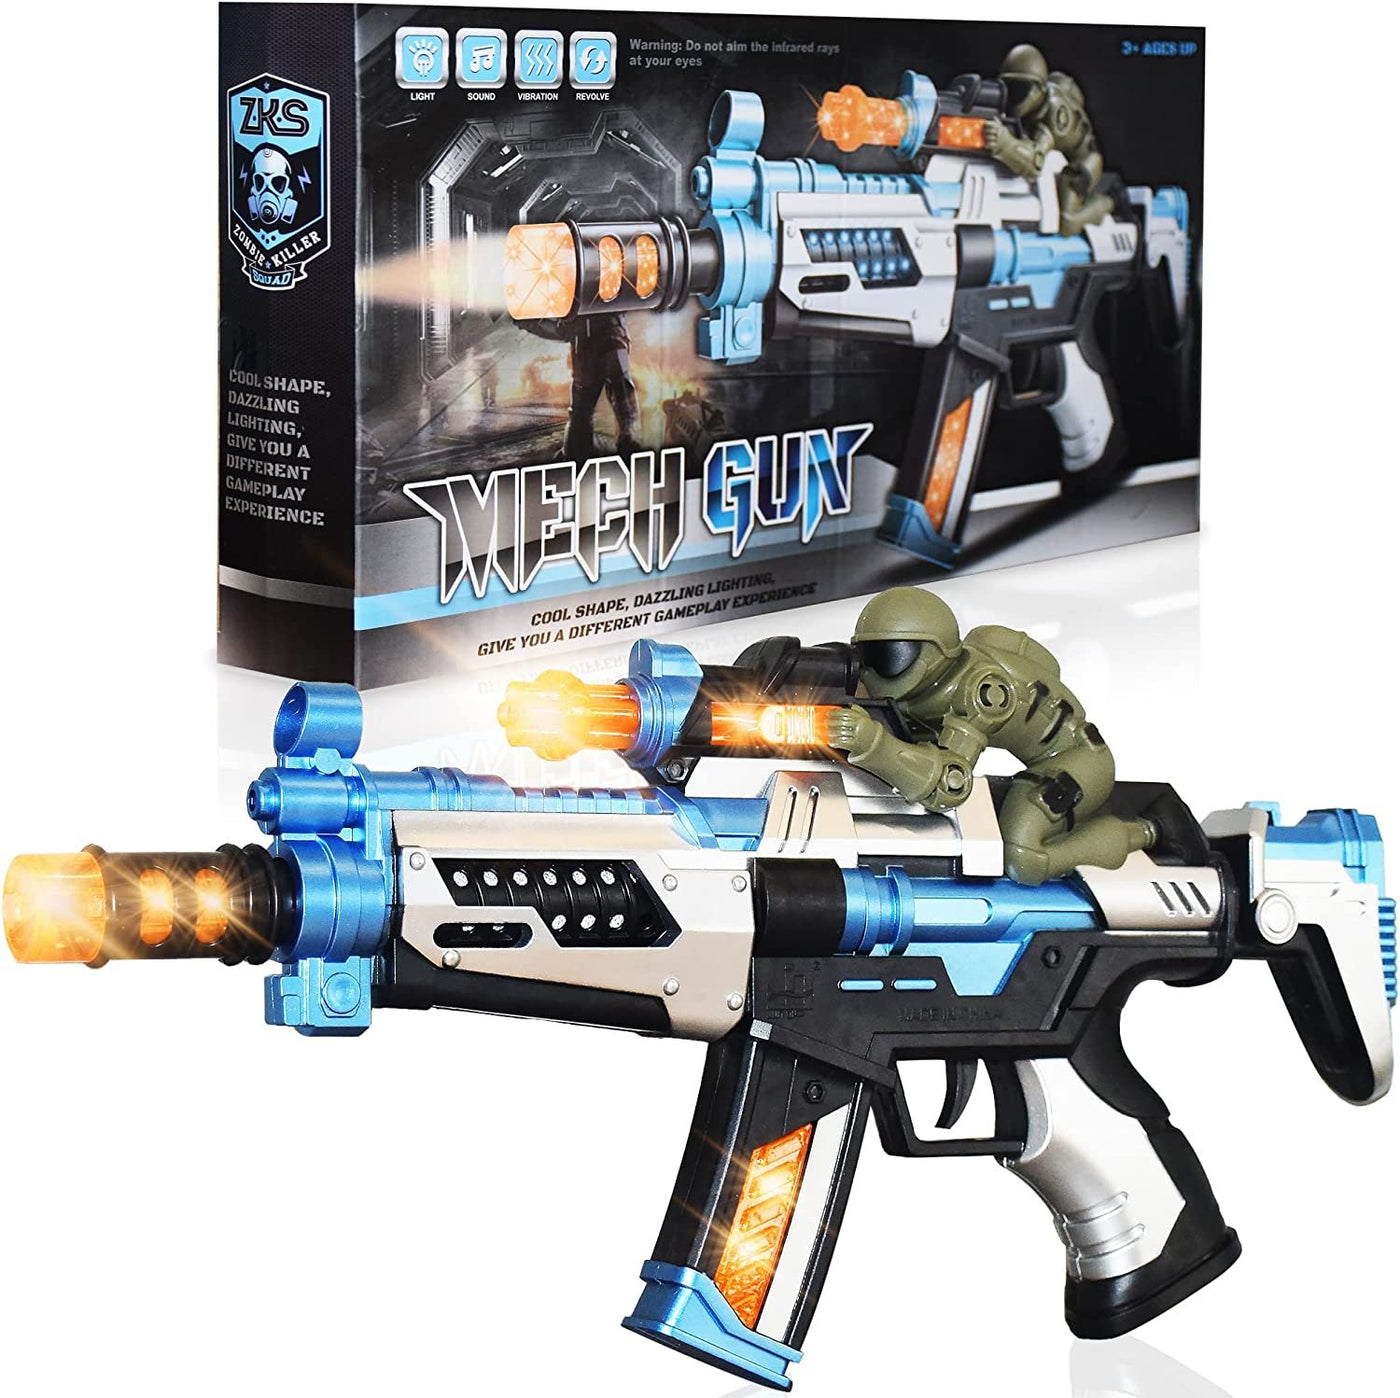 ArtCreativity FuryX Light Up Toy Gun for Kids with Vibrating Man - 16 Inch Blaster Gun with LED Lights, Sound Effects, and Vibration Feedback - Cool Toy Guns for Boys and Girls in Colorful Box